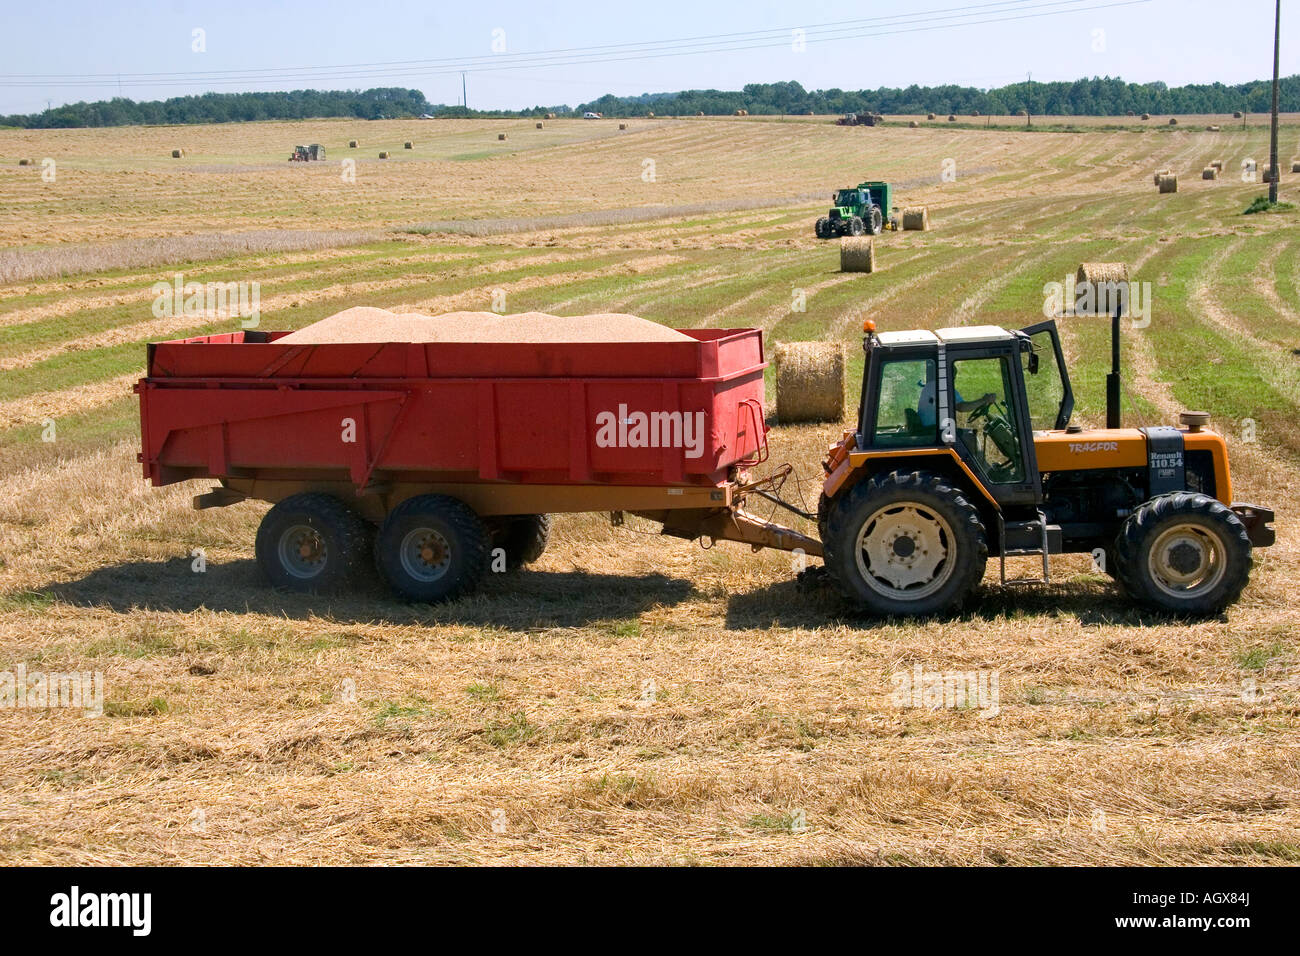 Wheat harvest near Vervins in the region of Picardie France Stock Photo